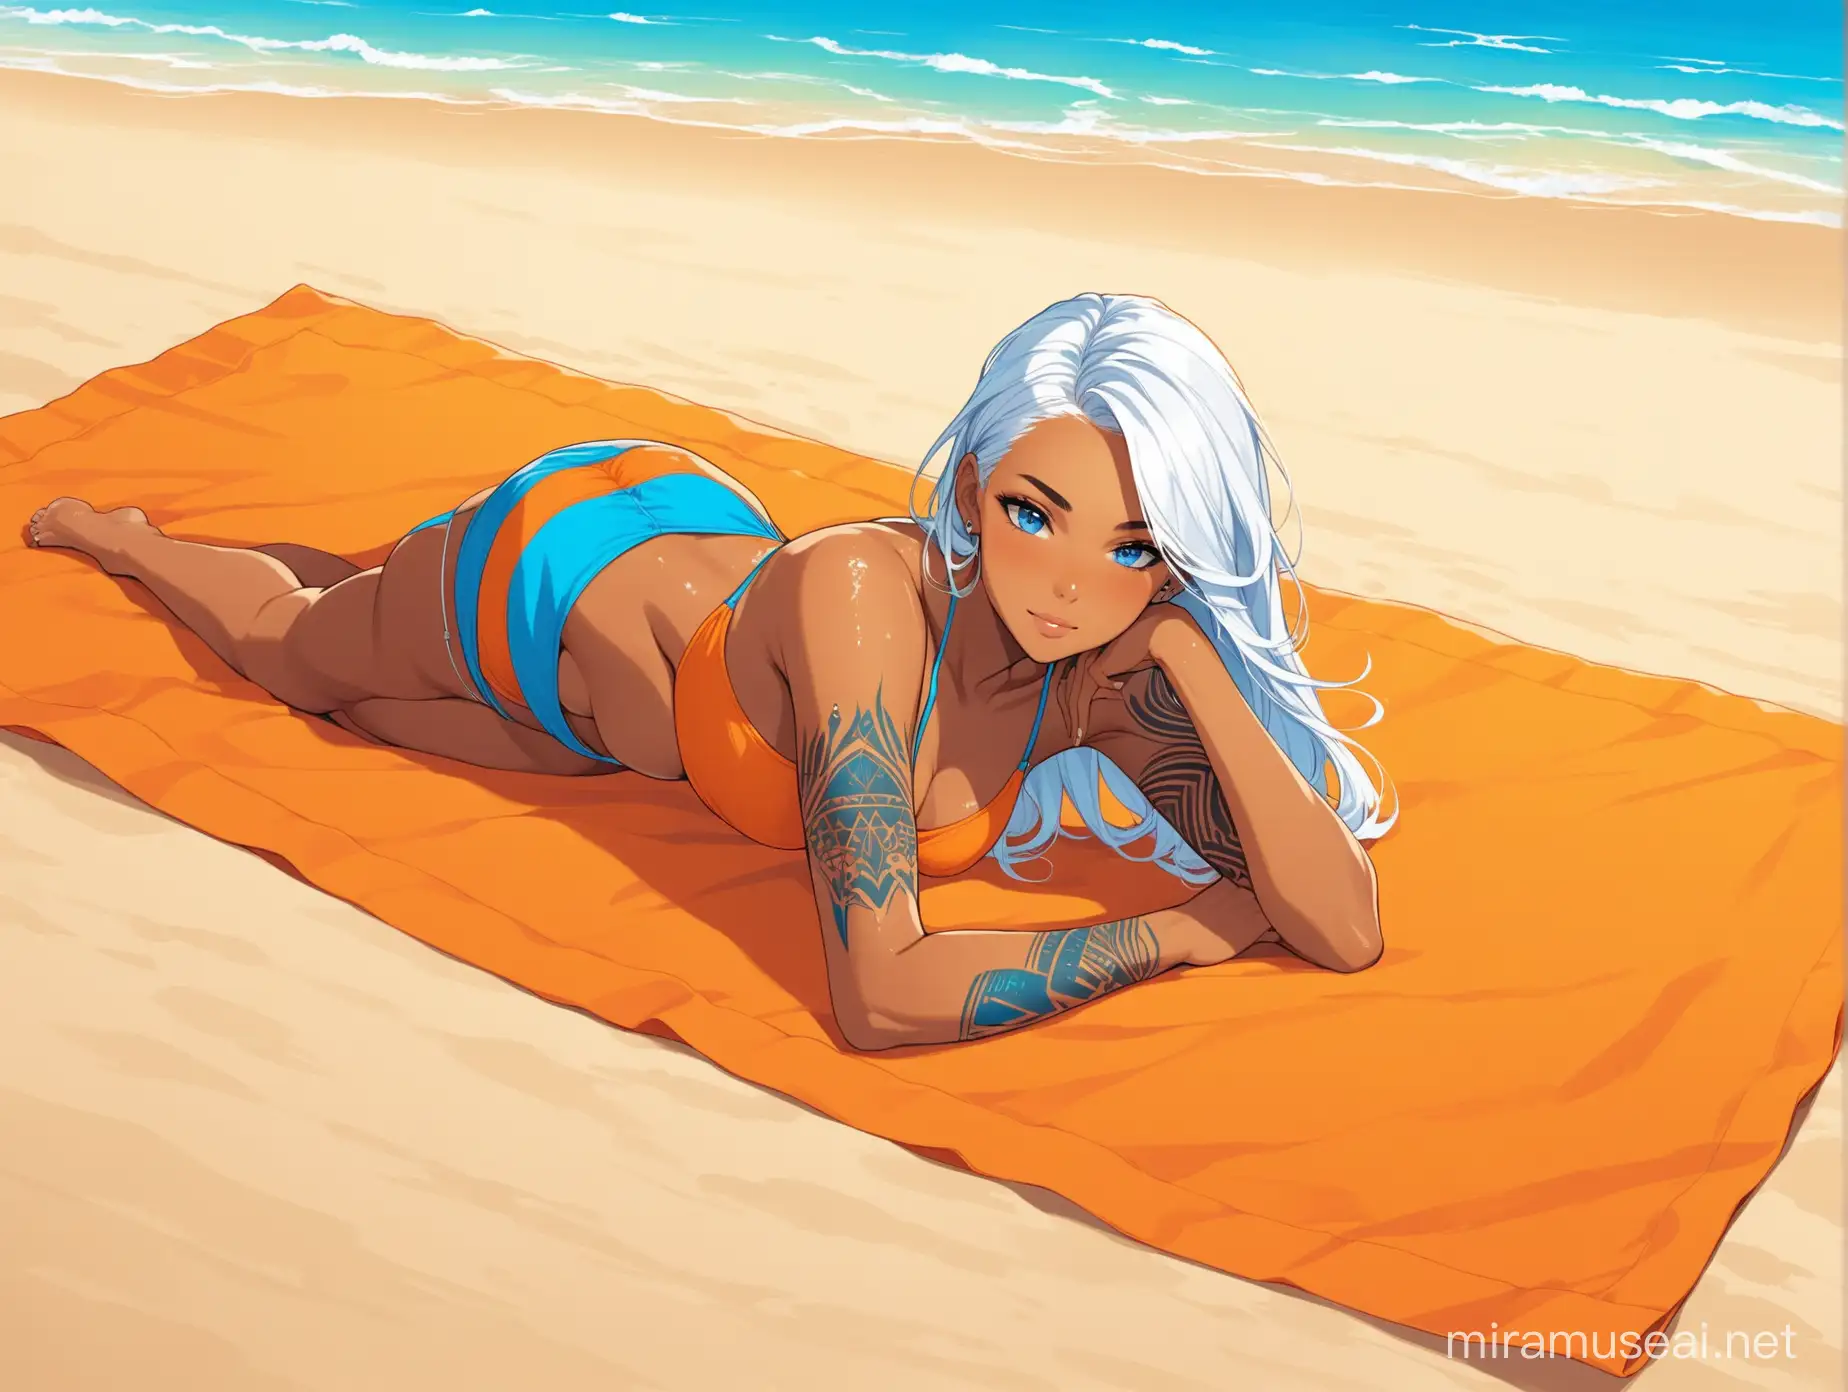 A young beautiful woman, in her 20s, with wet white hair, tanned brown skin, tonned figure, blue eyes and blue arrow tattoos, she is relaxing lying on a orange towel at the beach, wearing a blue and orange tow piece bikini